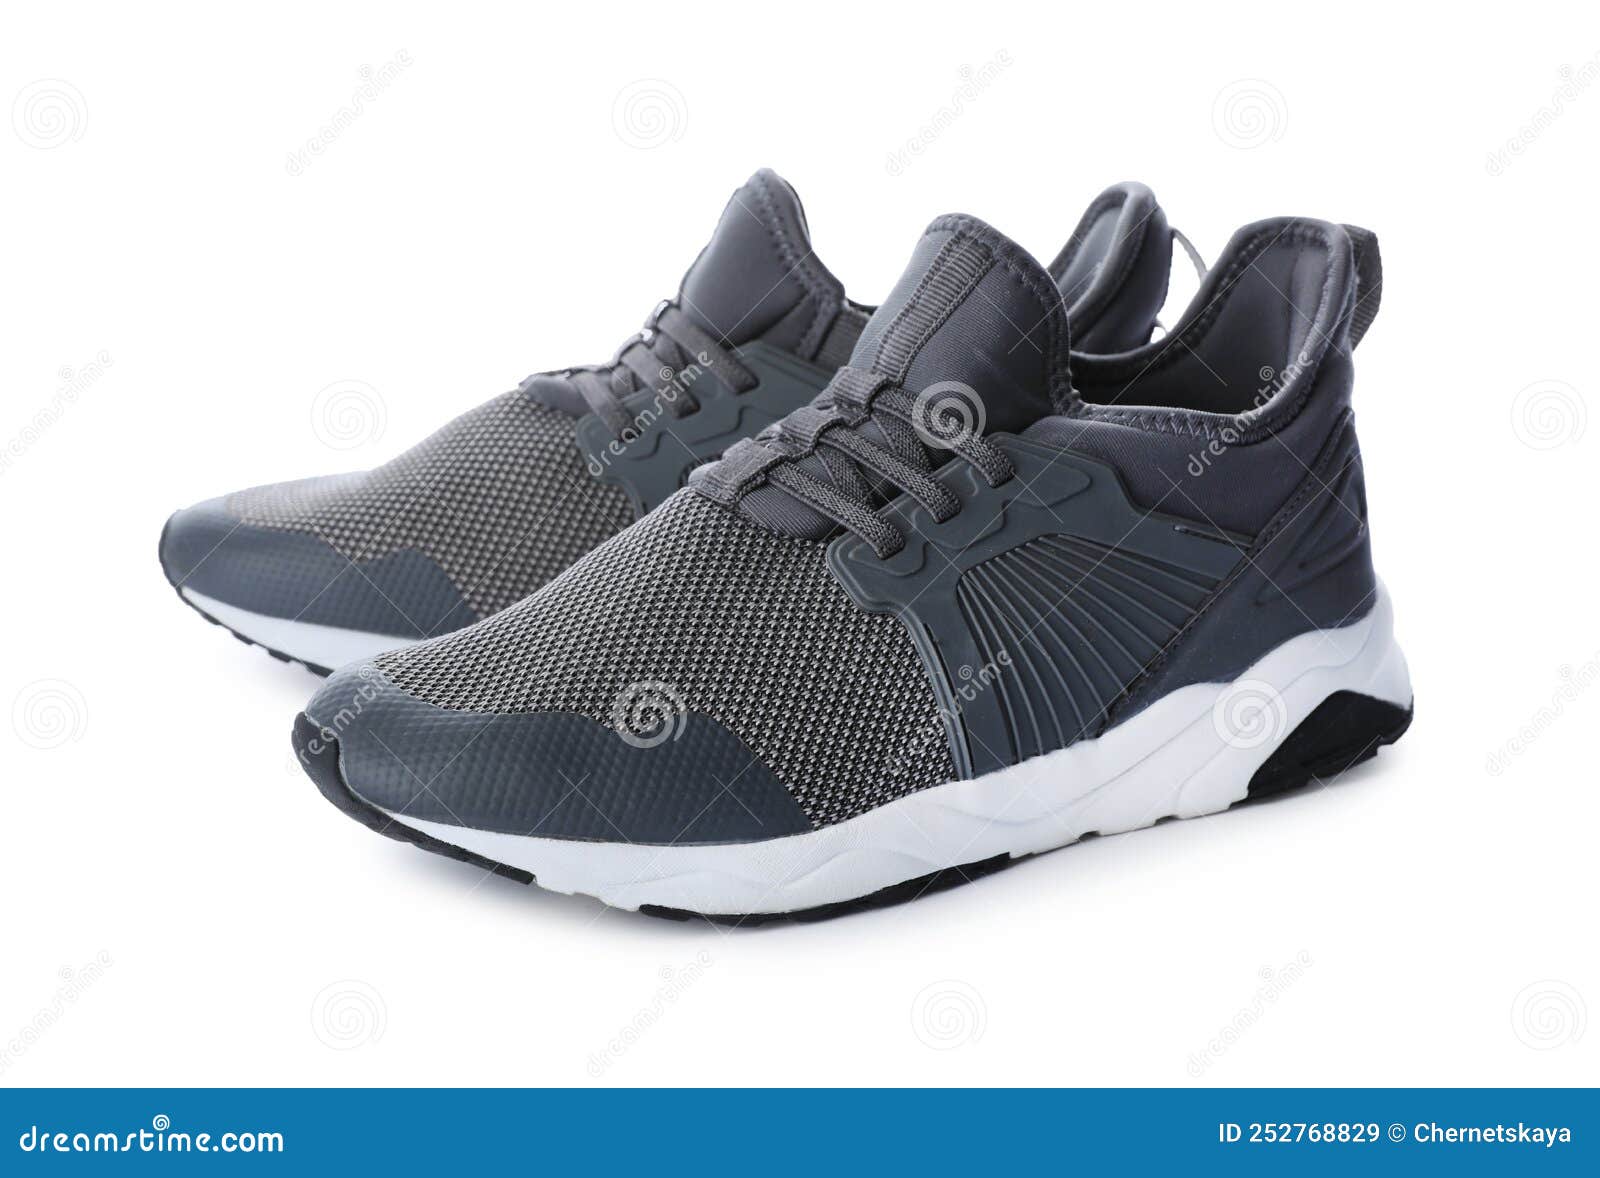 Pair of Stylish Grey Sneakers on White Background Stock Image - Image ...